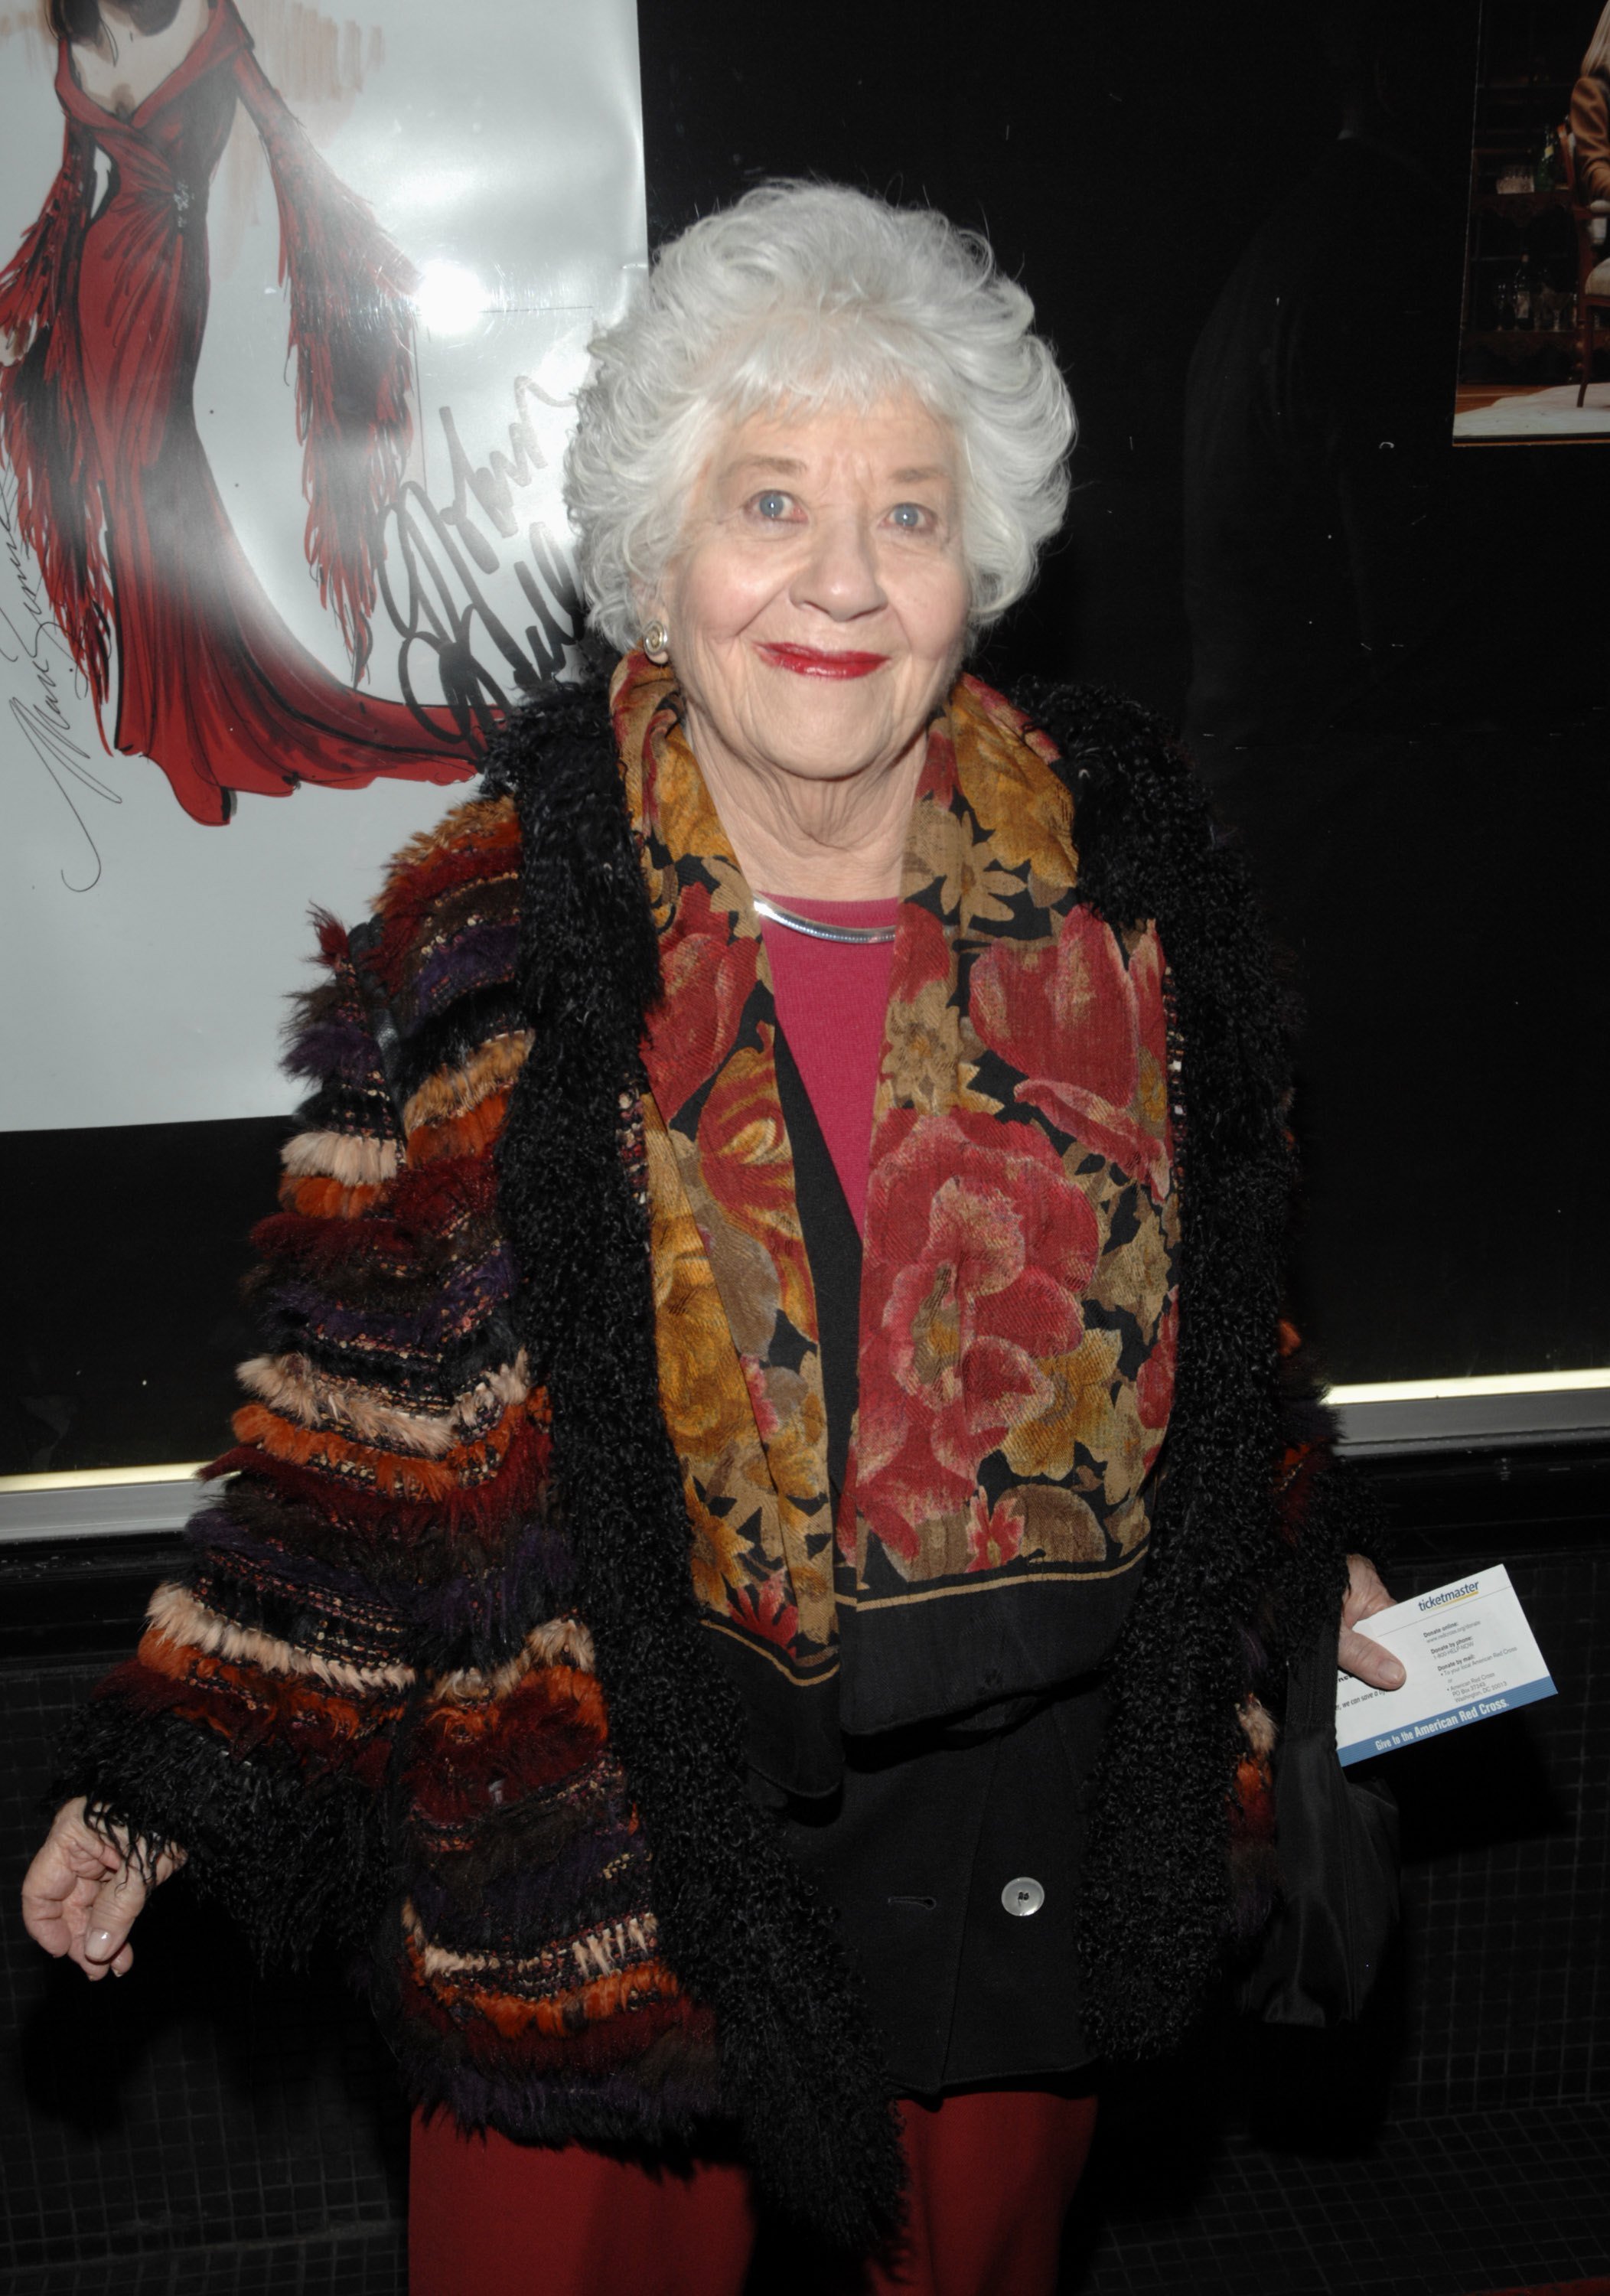 Charlotte Rae attends the premiere of "Legends" at the Wilshire Theatre in Beverly Hills, California on January 16, 2007 | Photo: Getty Images